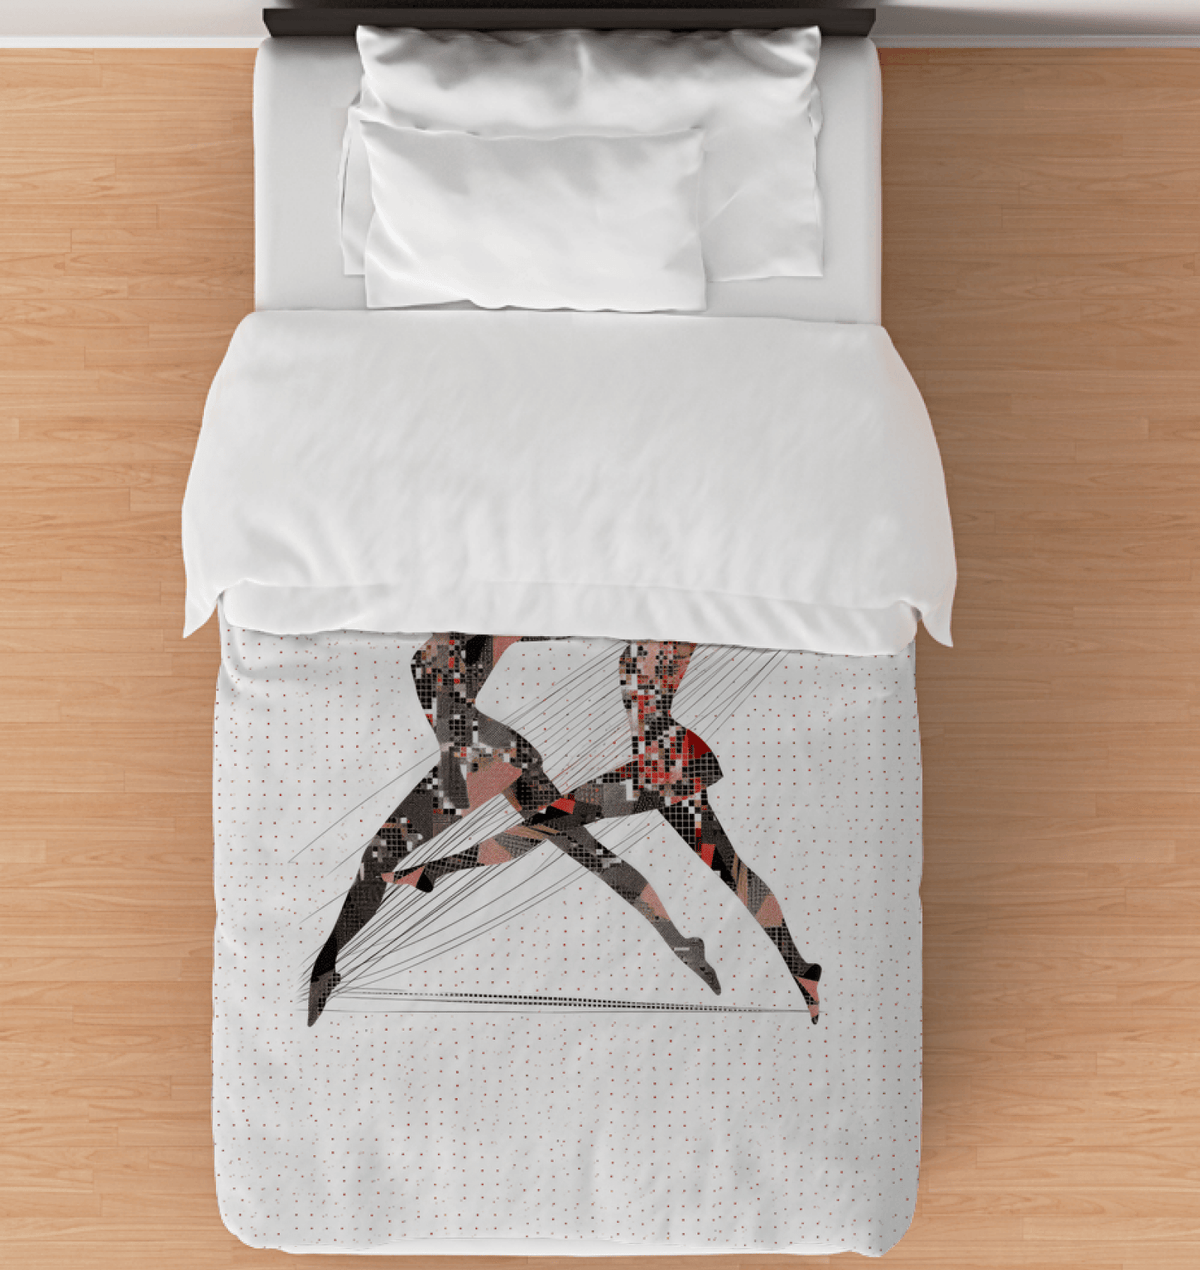 Colorful duvet cover featuring abstract dance expressions, ideal for modern bedroom decor.